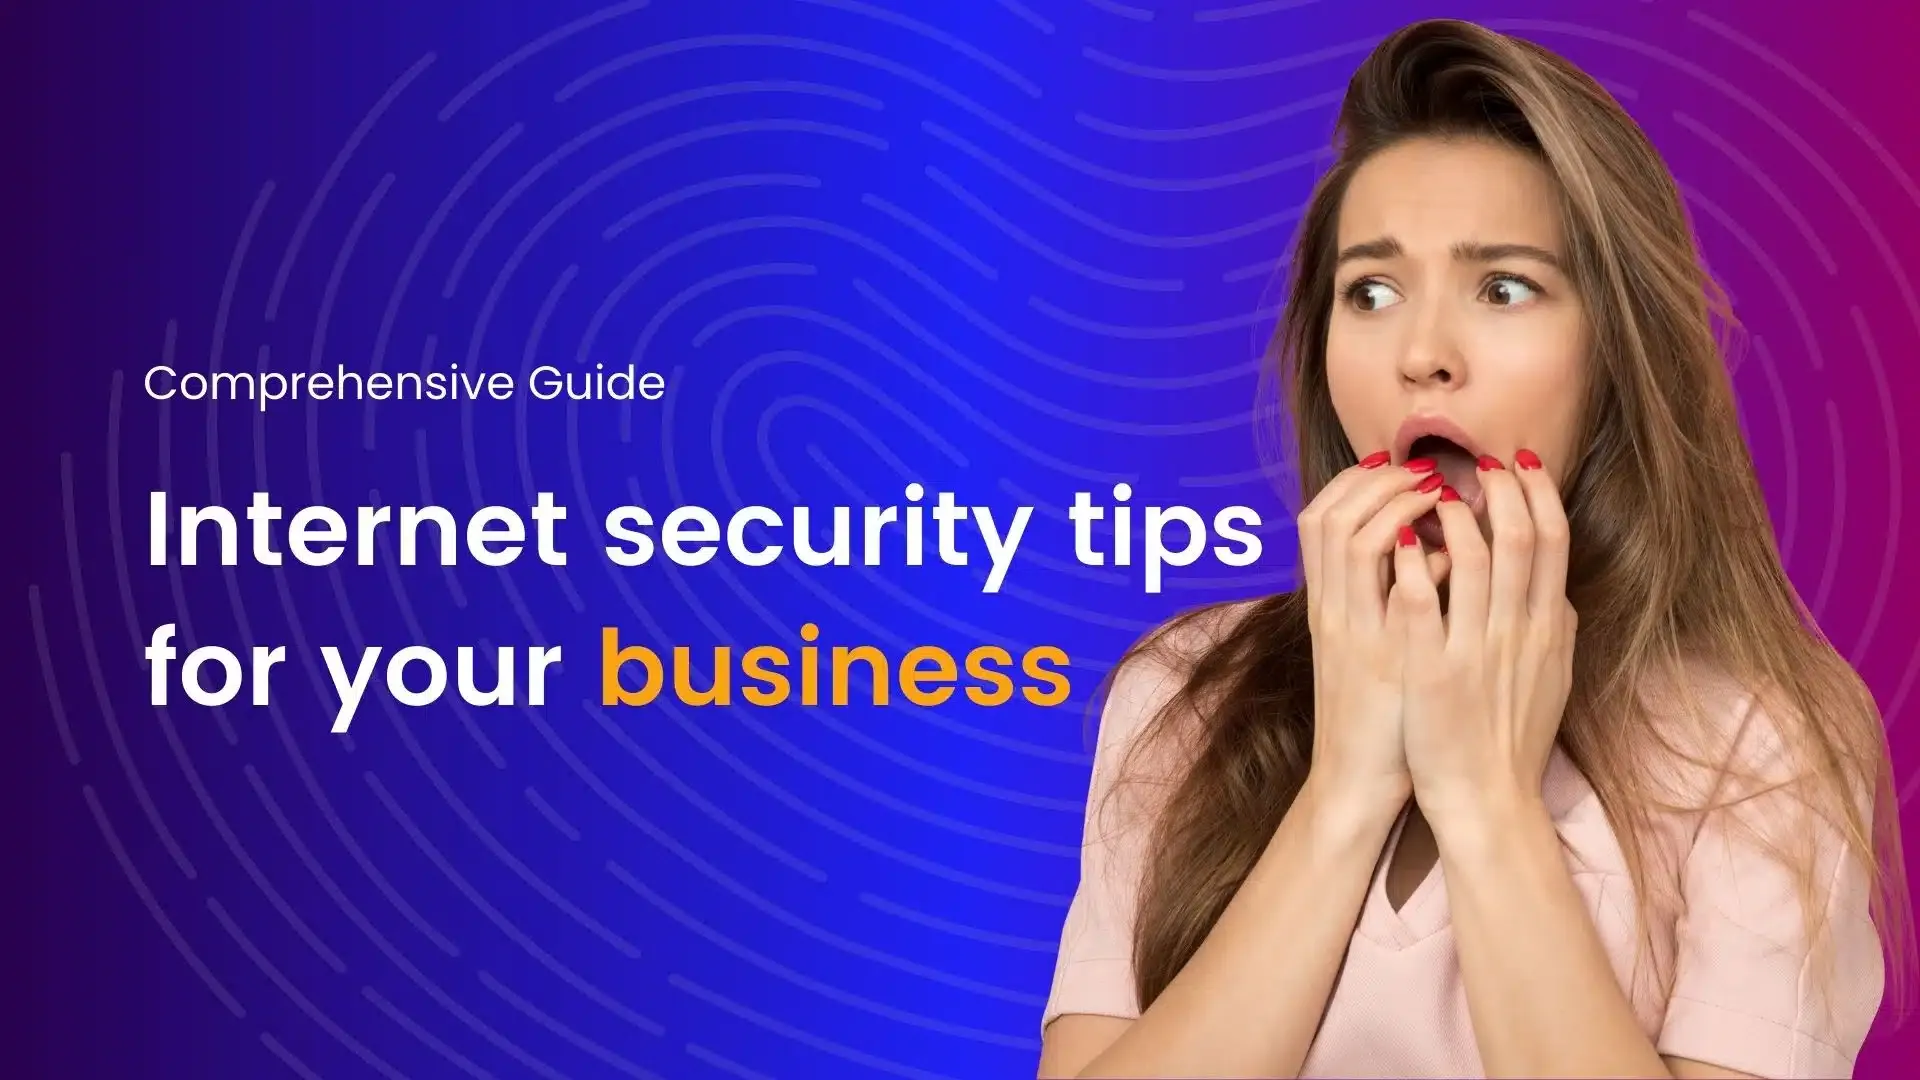 Internet security tips for your business